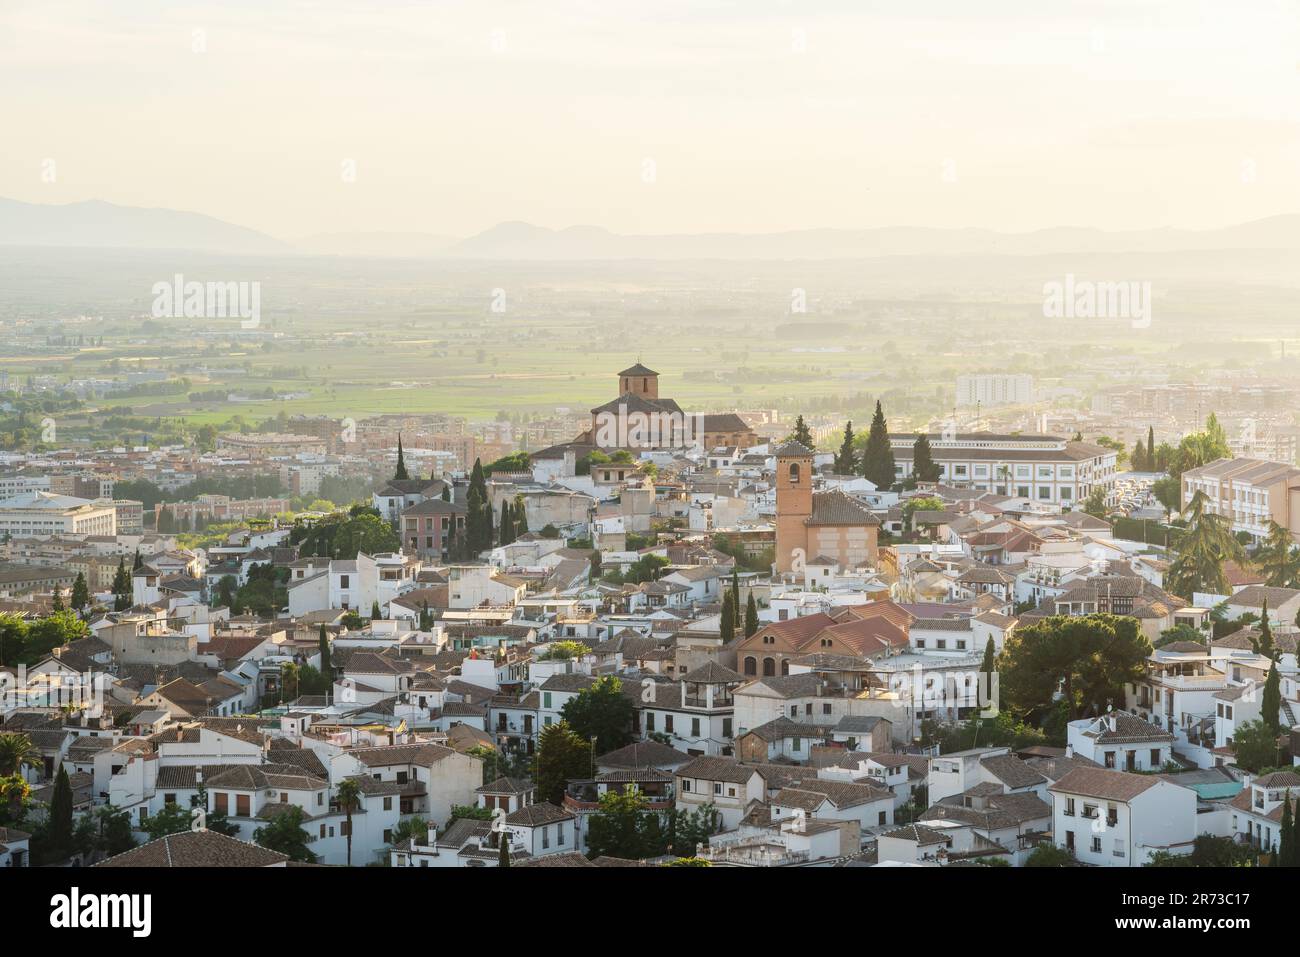 Aerial view of Church of San Bartolome and Church of San Cristobal - Granada, Andalusia, Spain Stock Photo